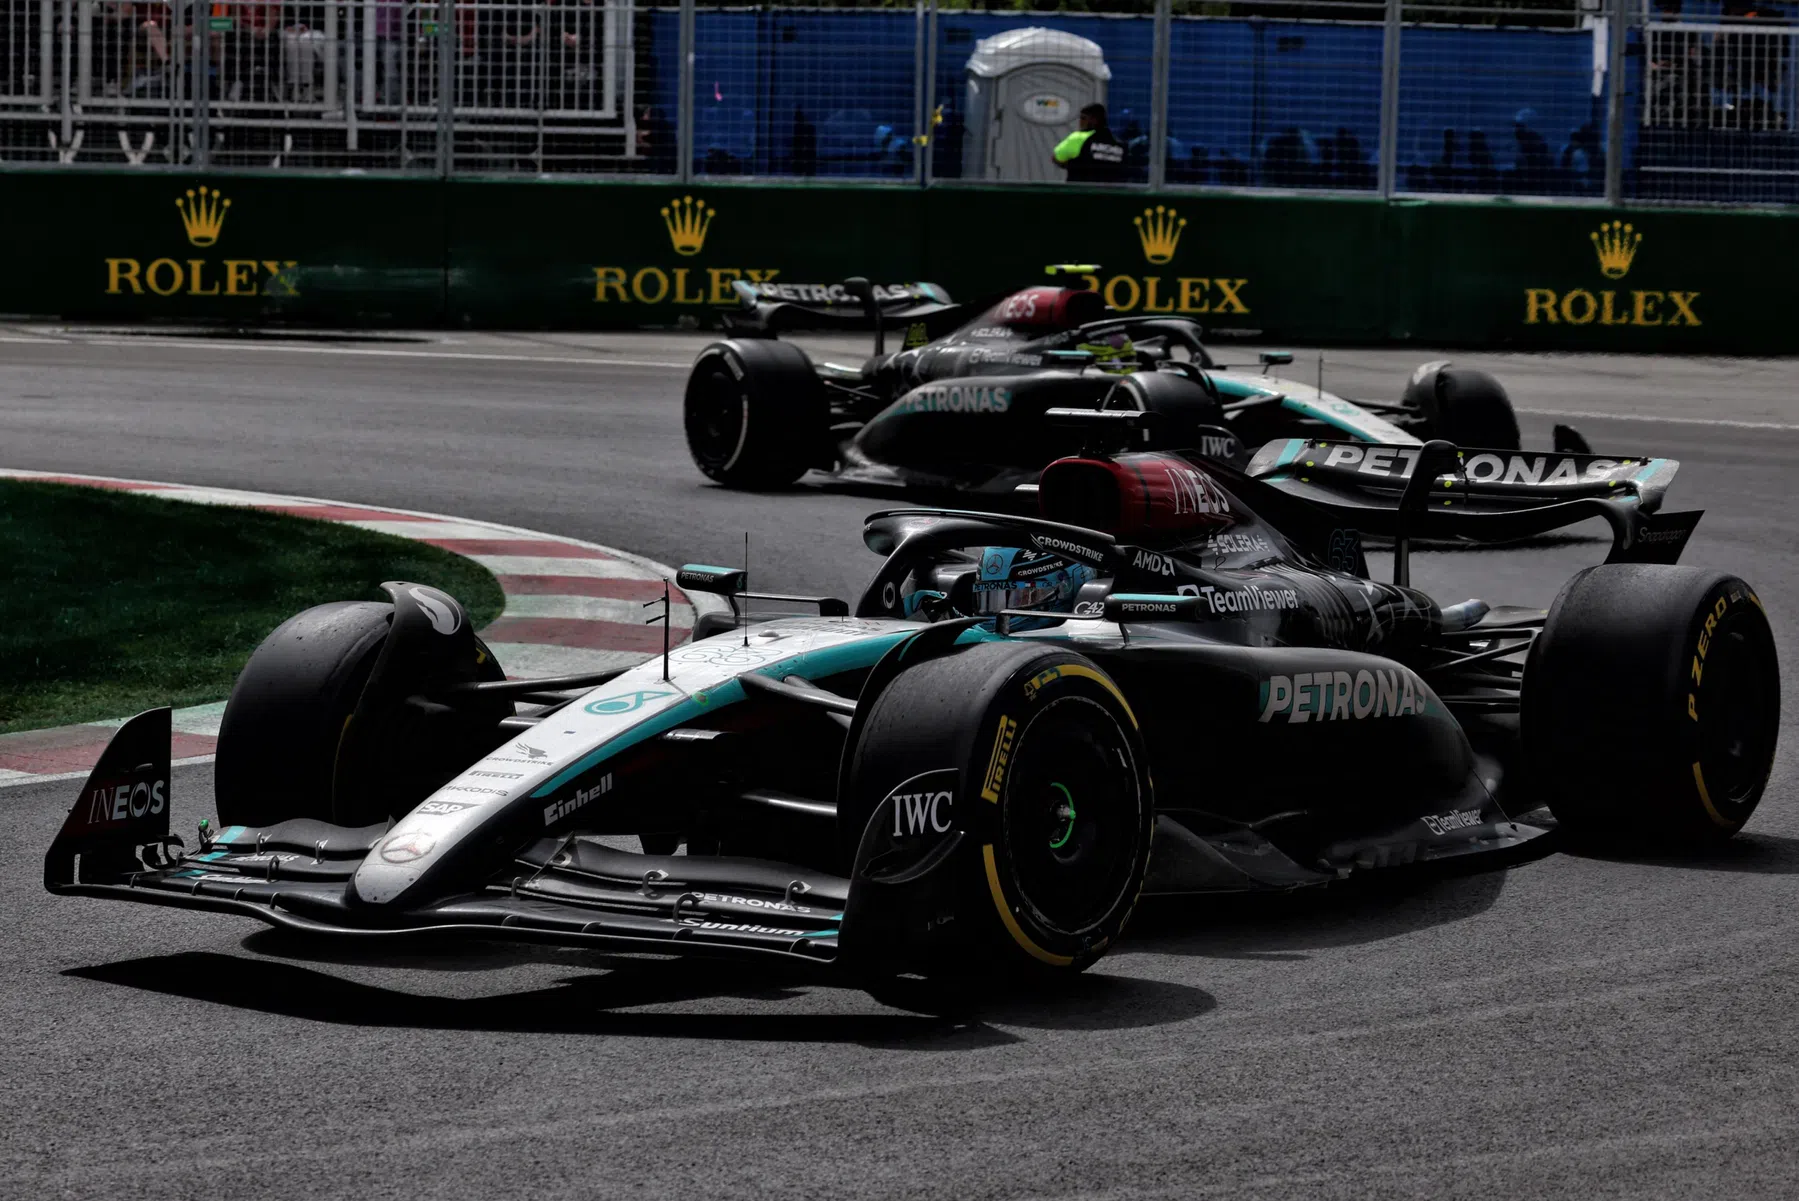 Mercedes sees progress with new updates but are less confident for next GP 